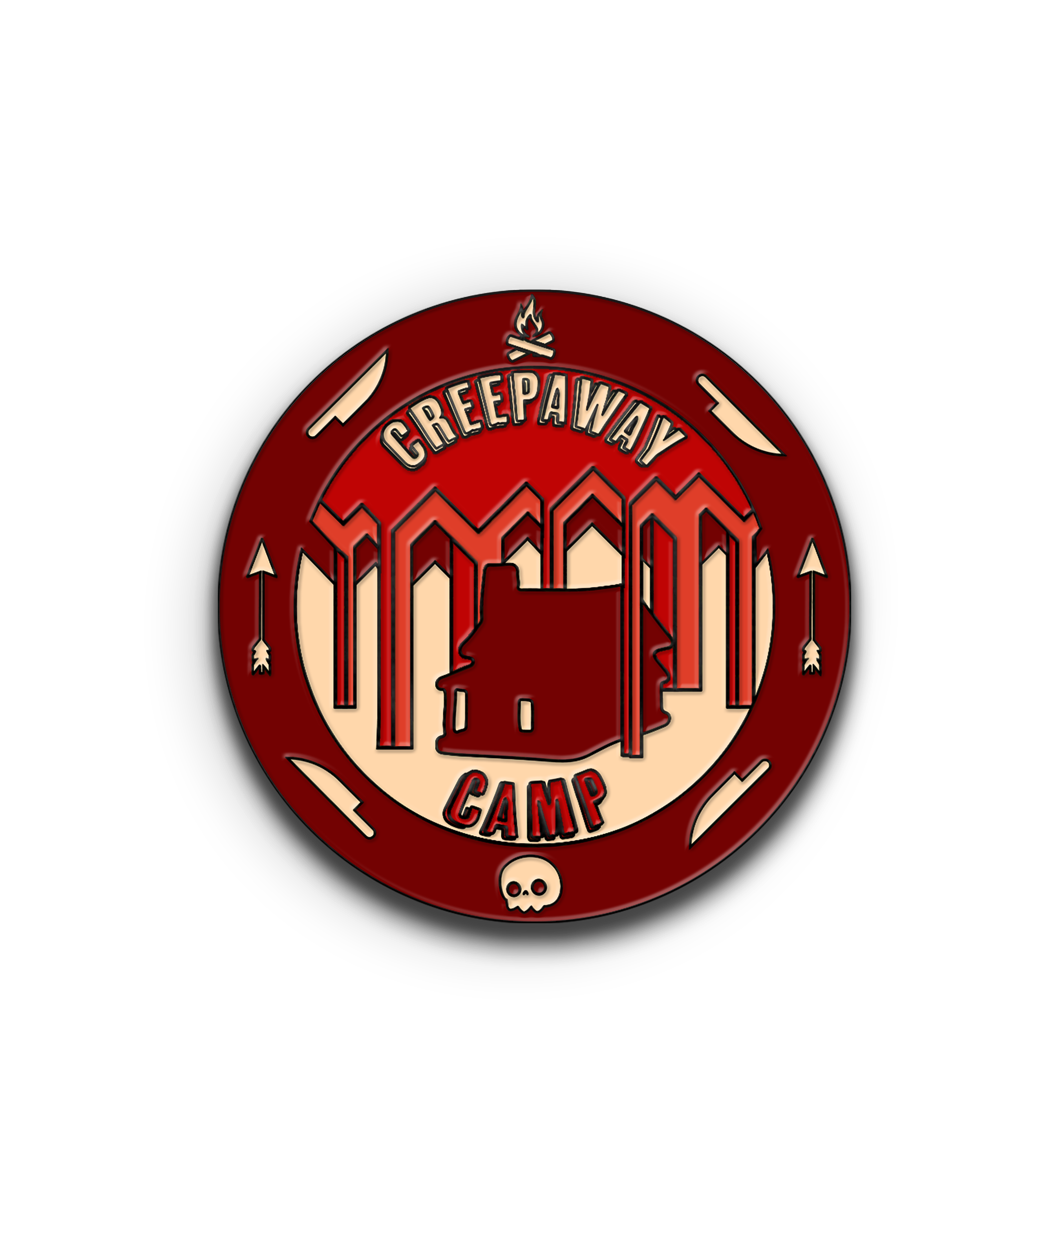 A circular pin with a dark red band goes around the outside with icons of a campfire, knives, arrows and a skull. Inside the circle is a small log cabin and text that reads "Creepaway Camp" all in different shades of red and white. From Creepy.